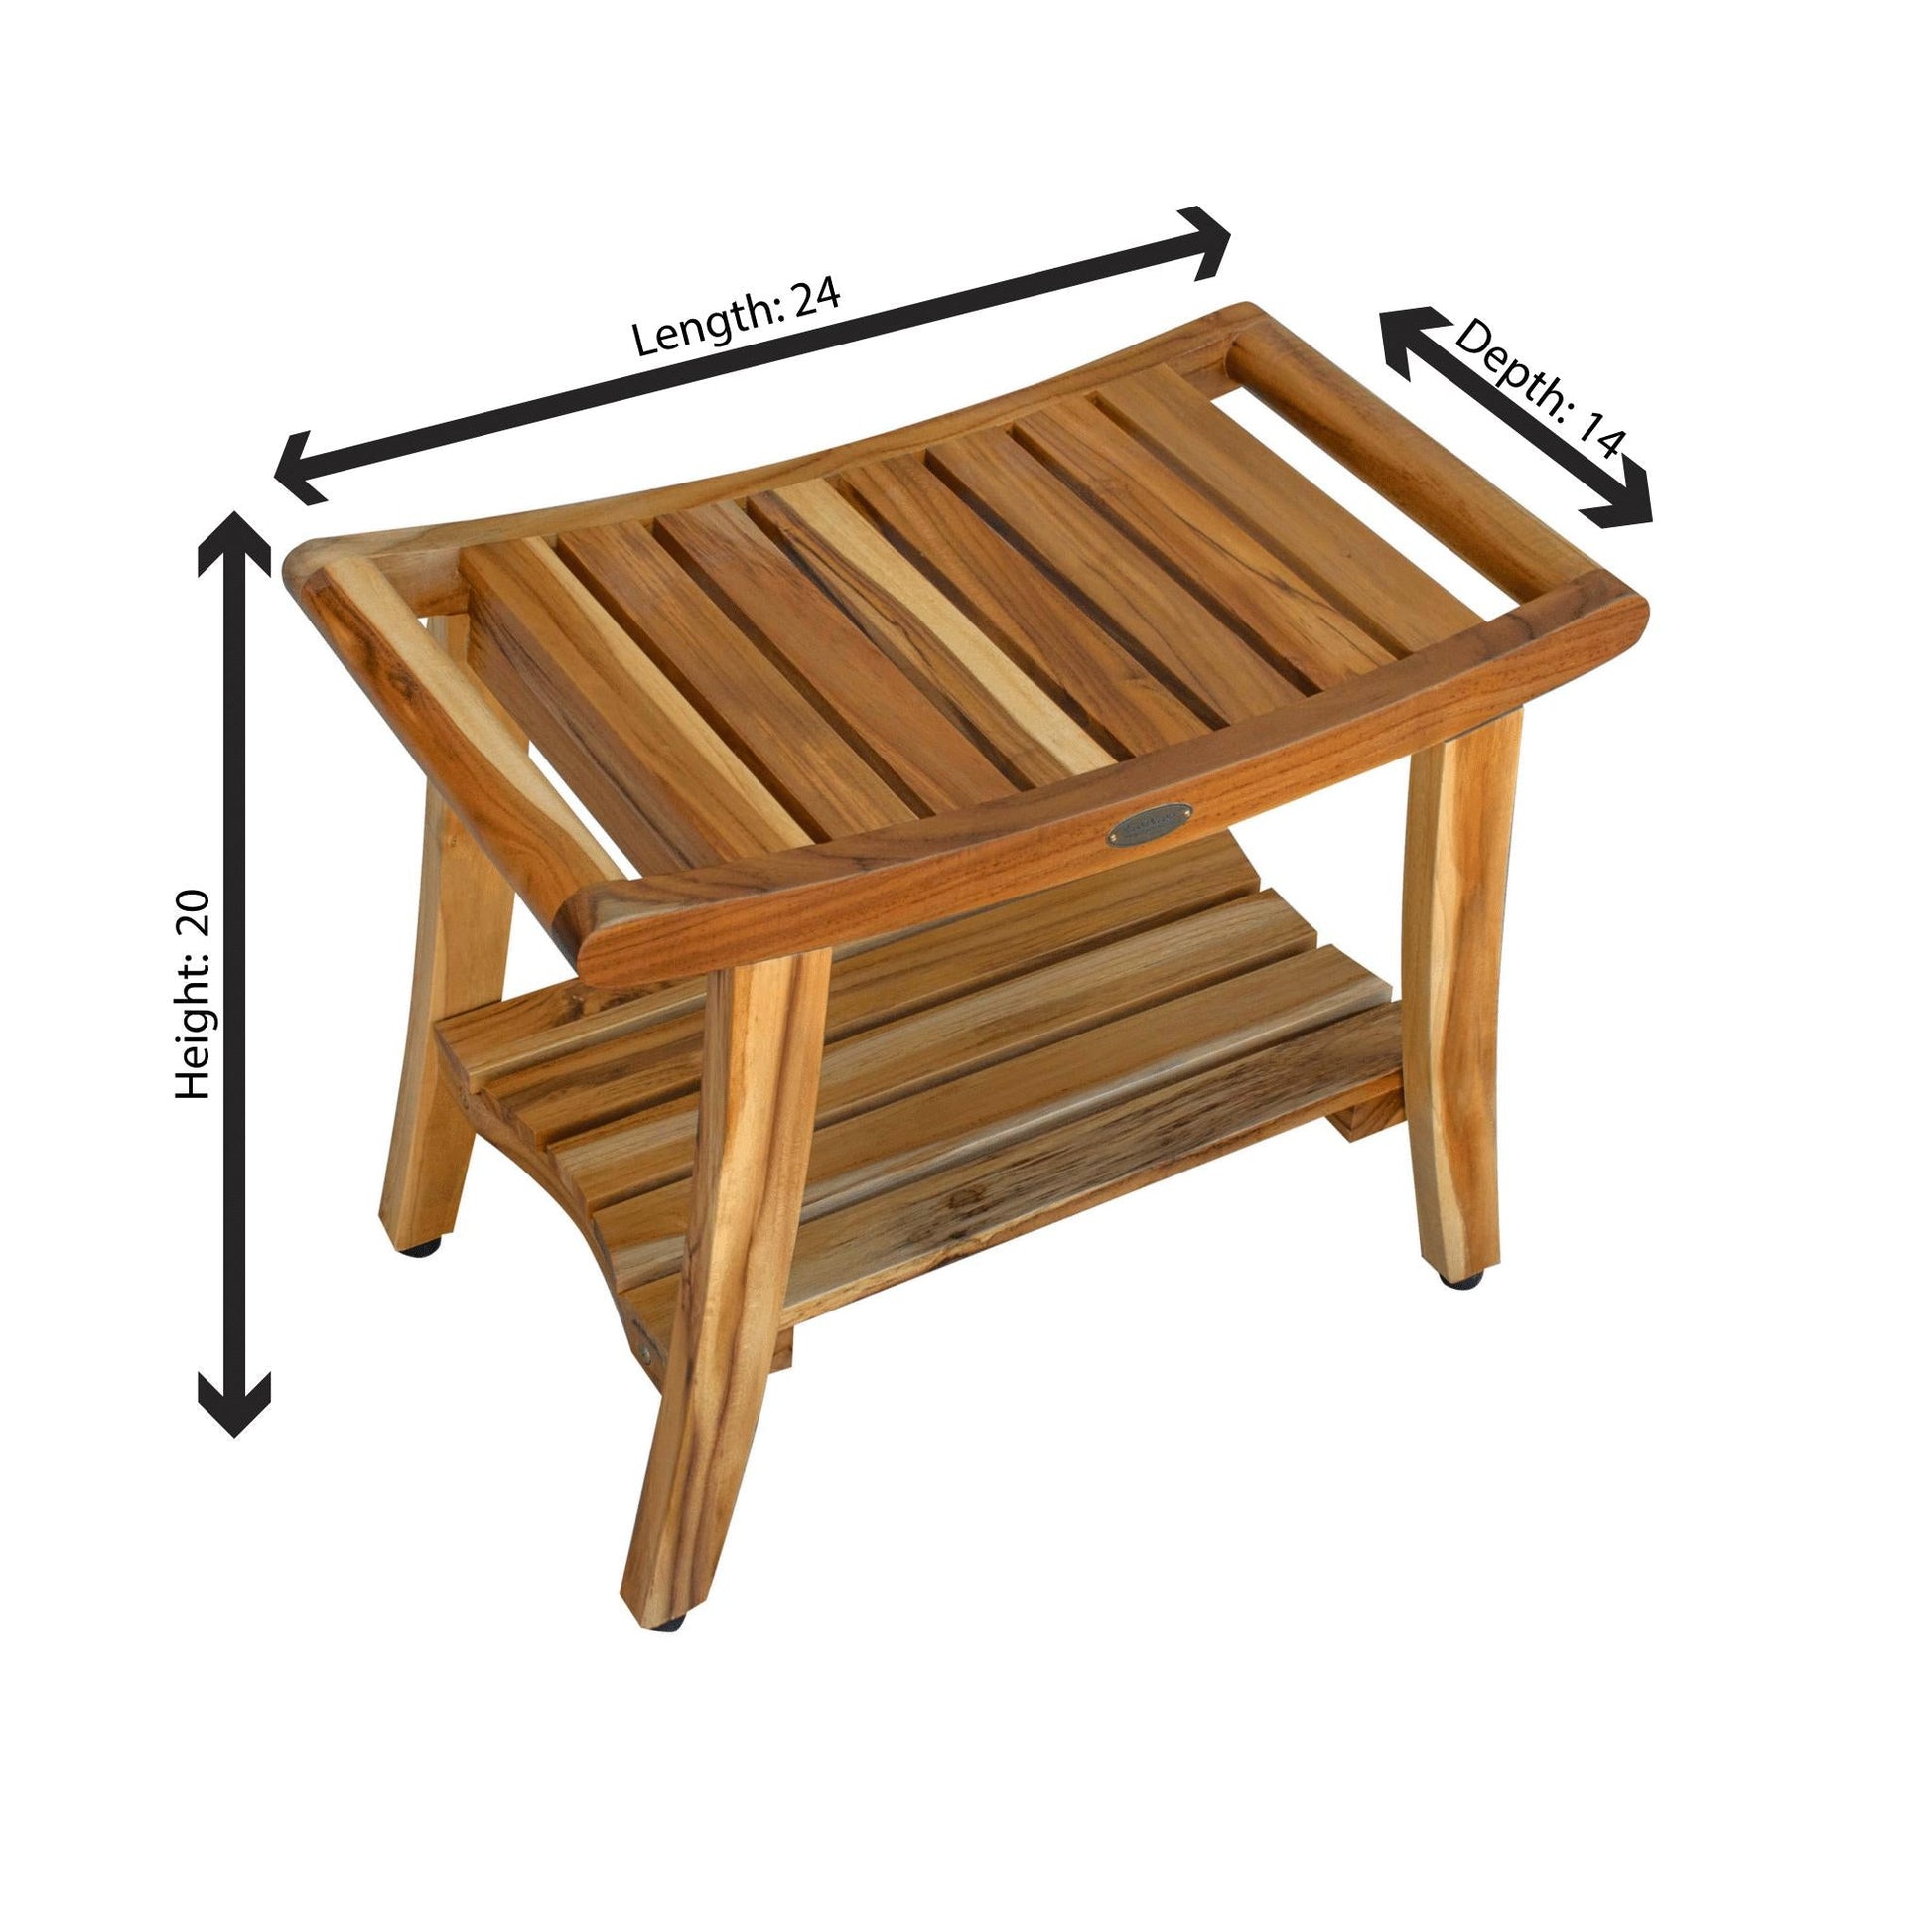 EcoDecors Harmony 24" EarthyTeak Solid Teak Wood Shower Bench With Shelf and LiftAide Arms